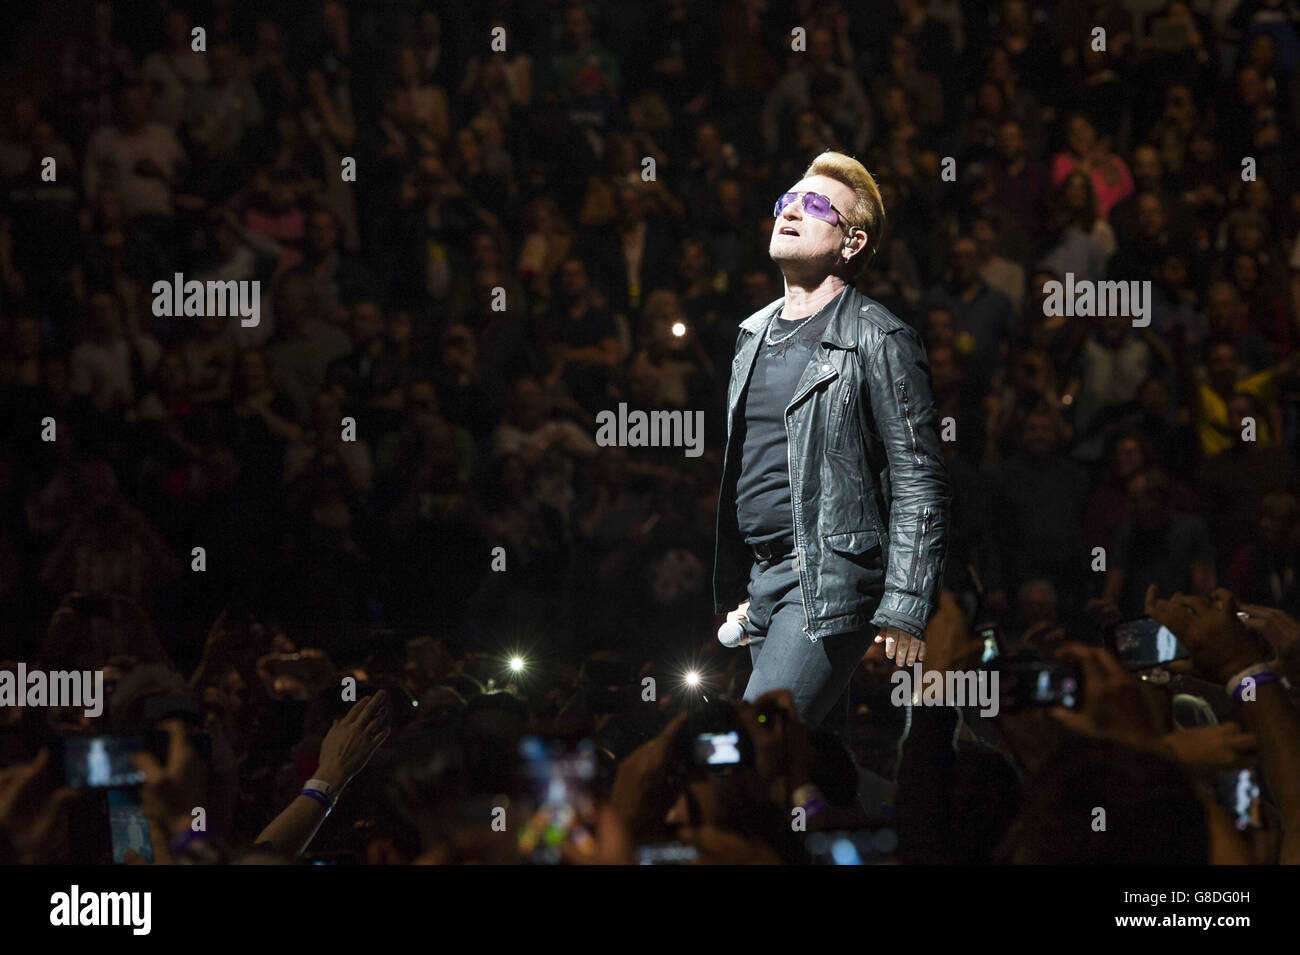 Bono from U2 performing during their Innocence + Experience tour at the O2 arena in Greenwich, London. Stock Photo